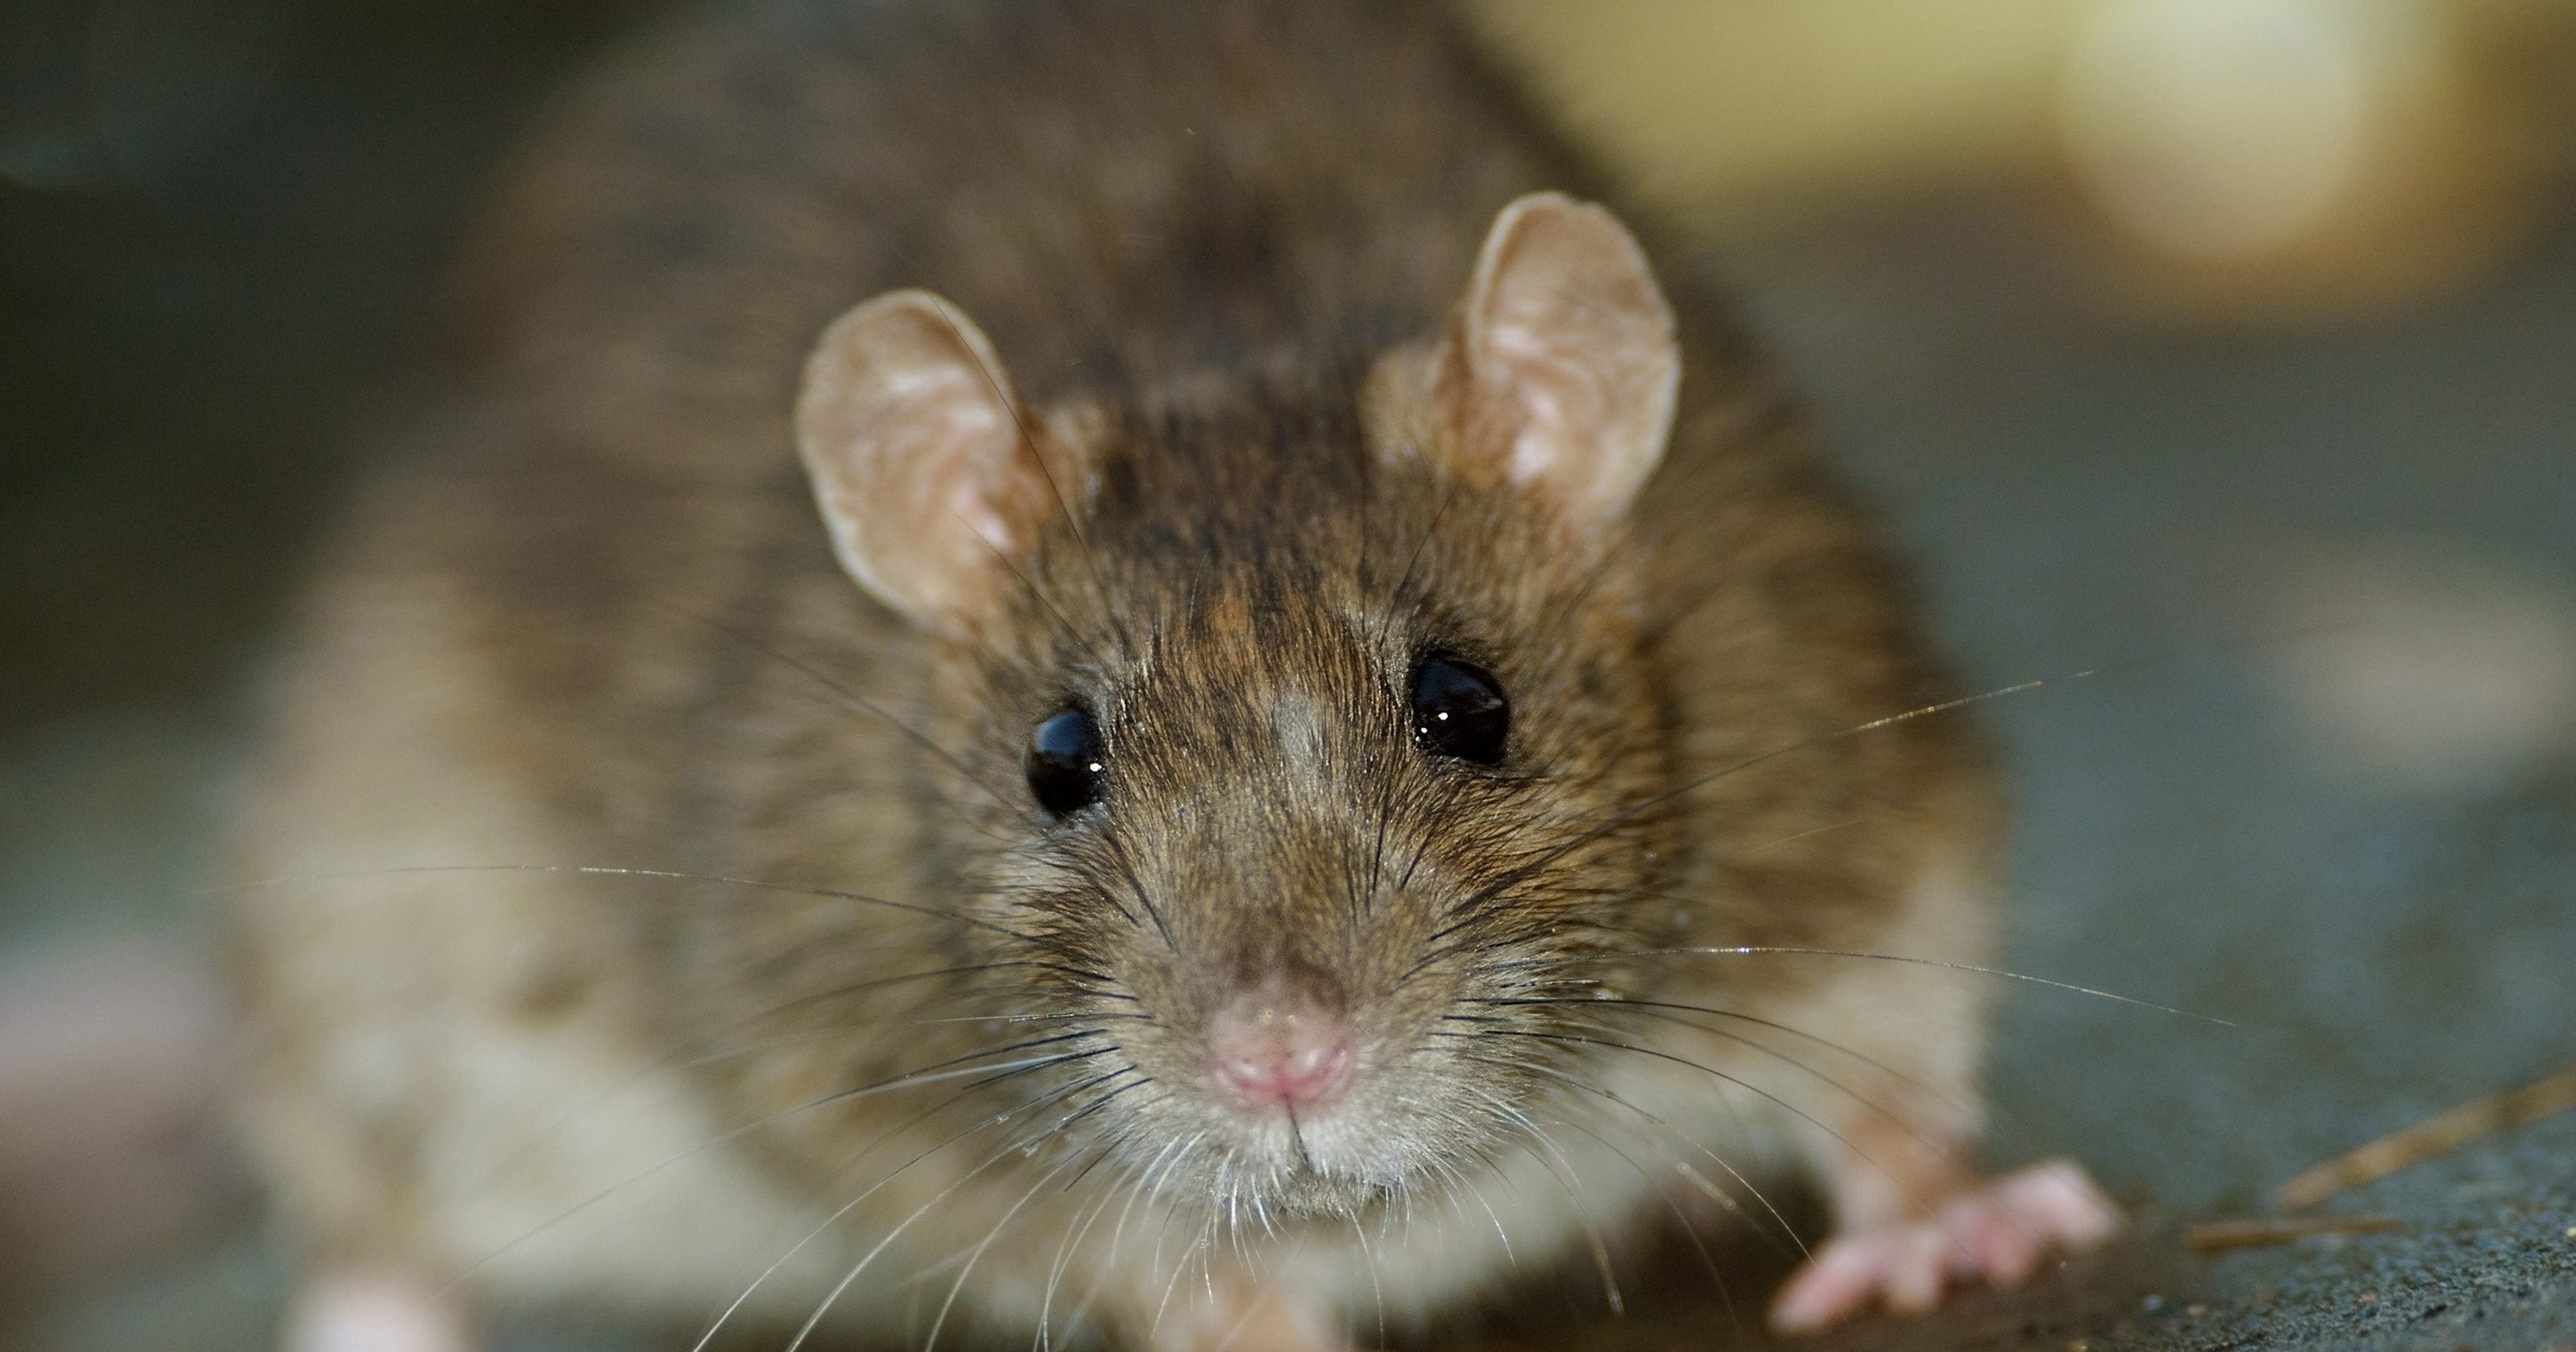 Wauwatosa Is Trying To Solve Its Rat Problems